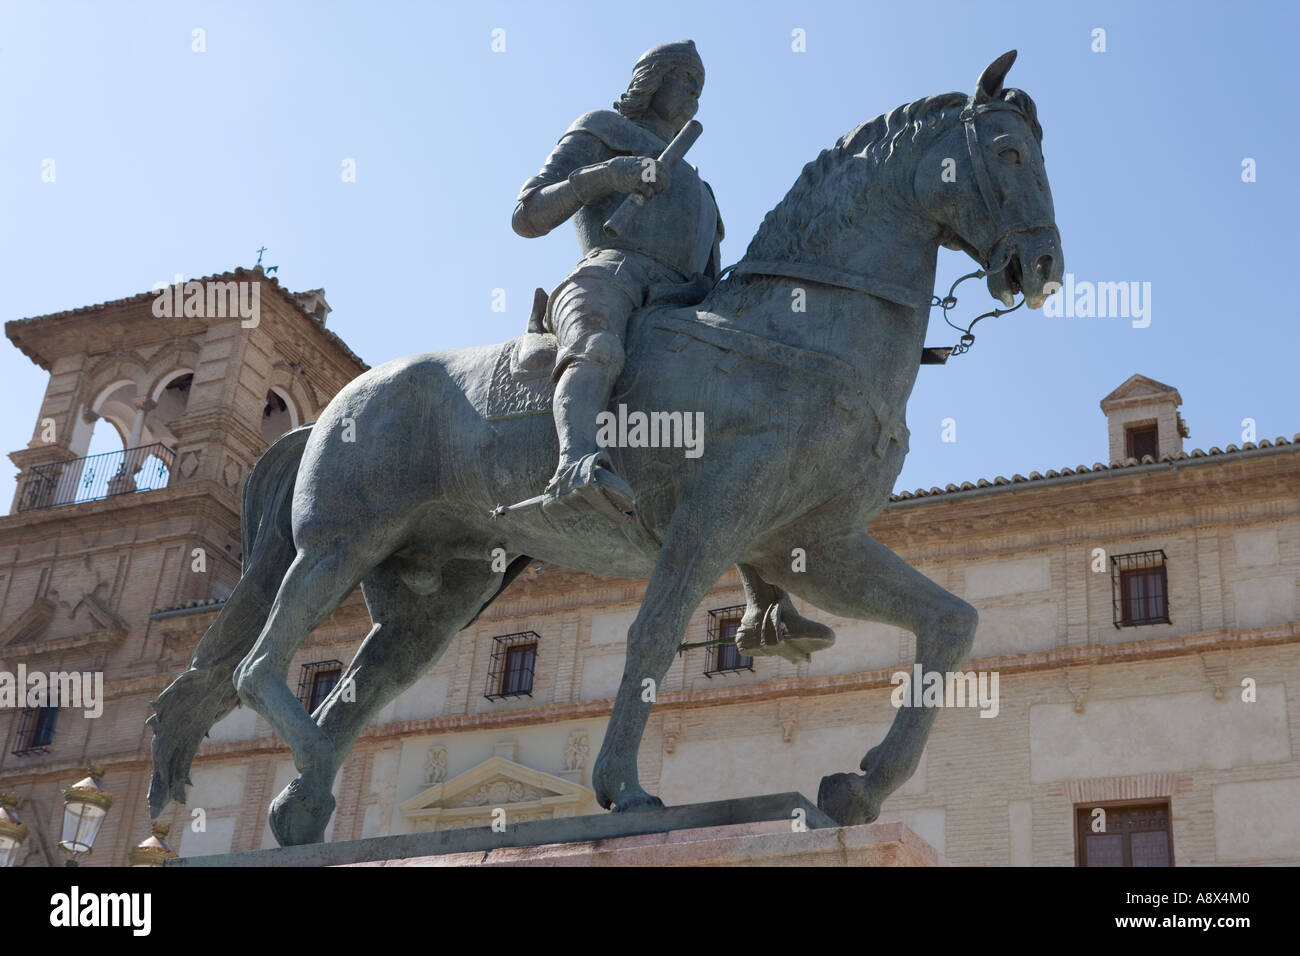 Antequera, Malaga Province, Spain.  Fernando I 1379 - 1416 'He of Antequera' Prince of Castille King of Aragon. Stock Photo